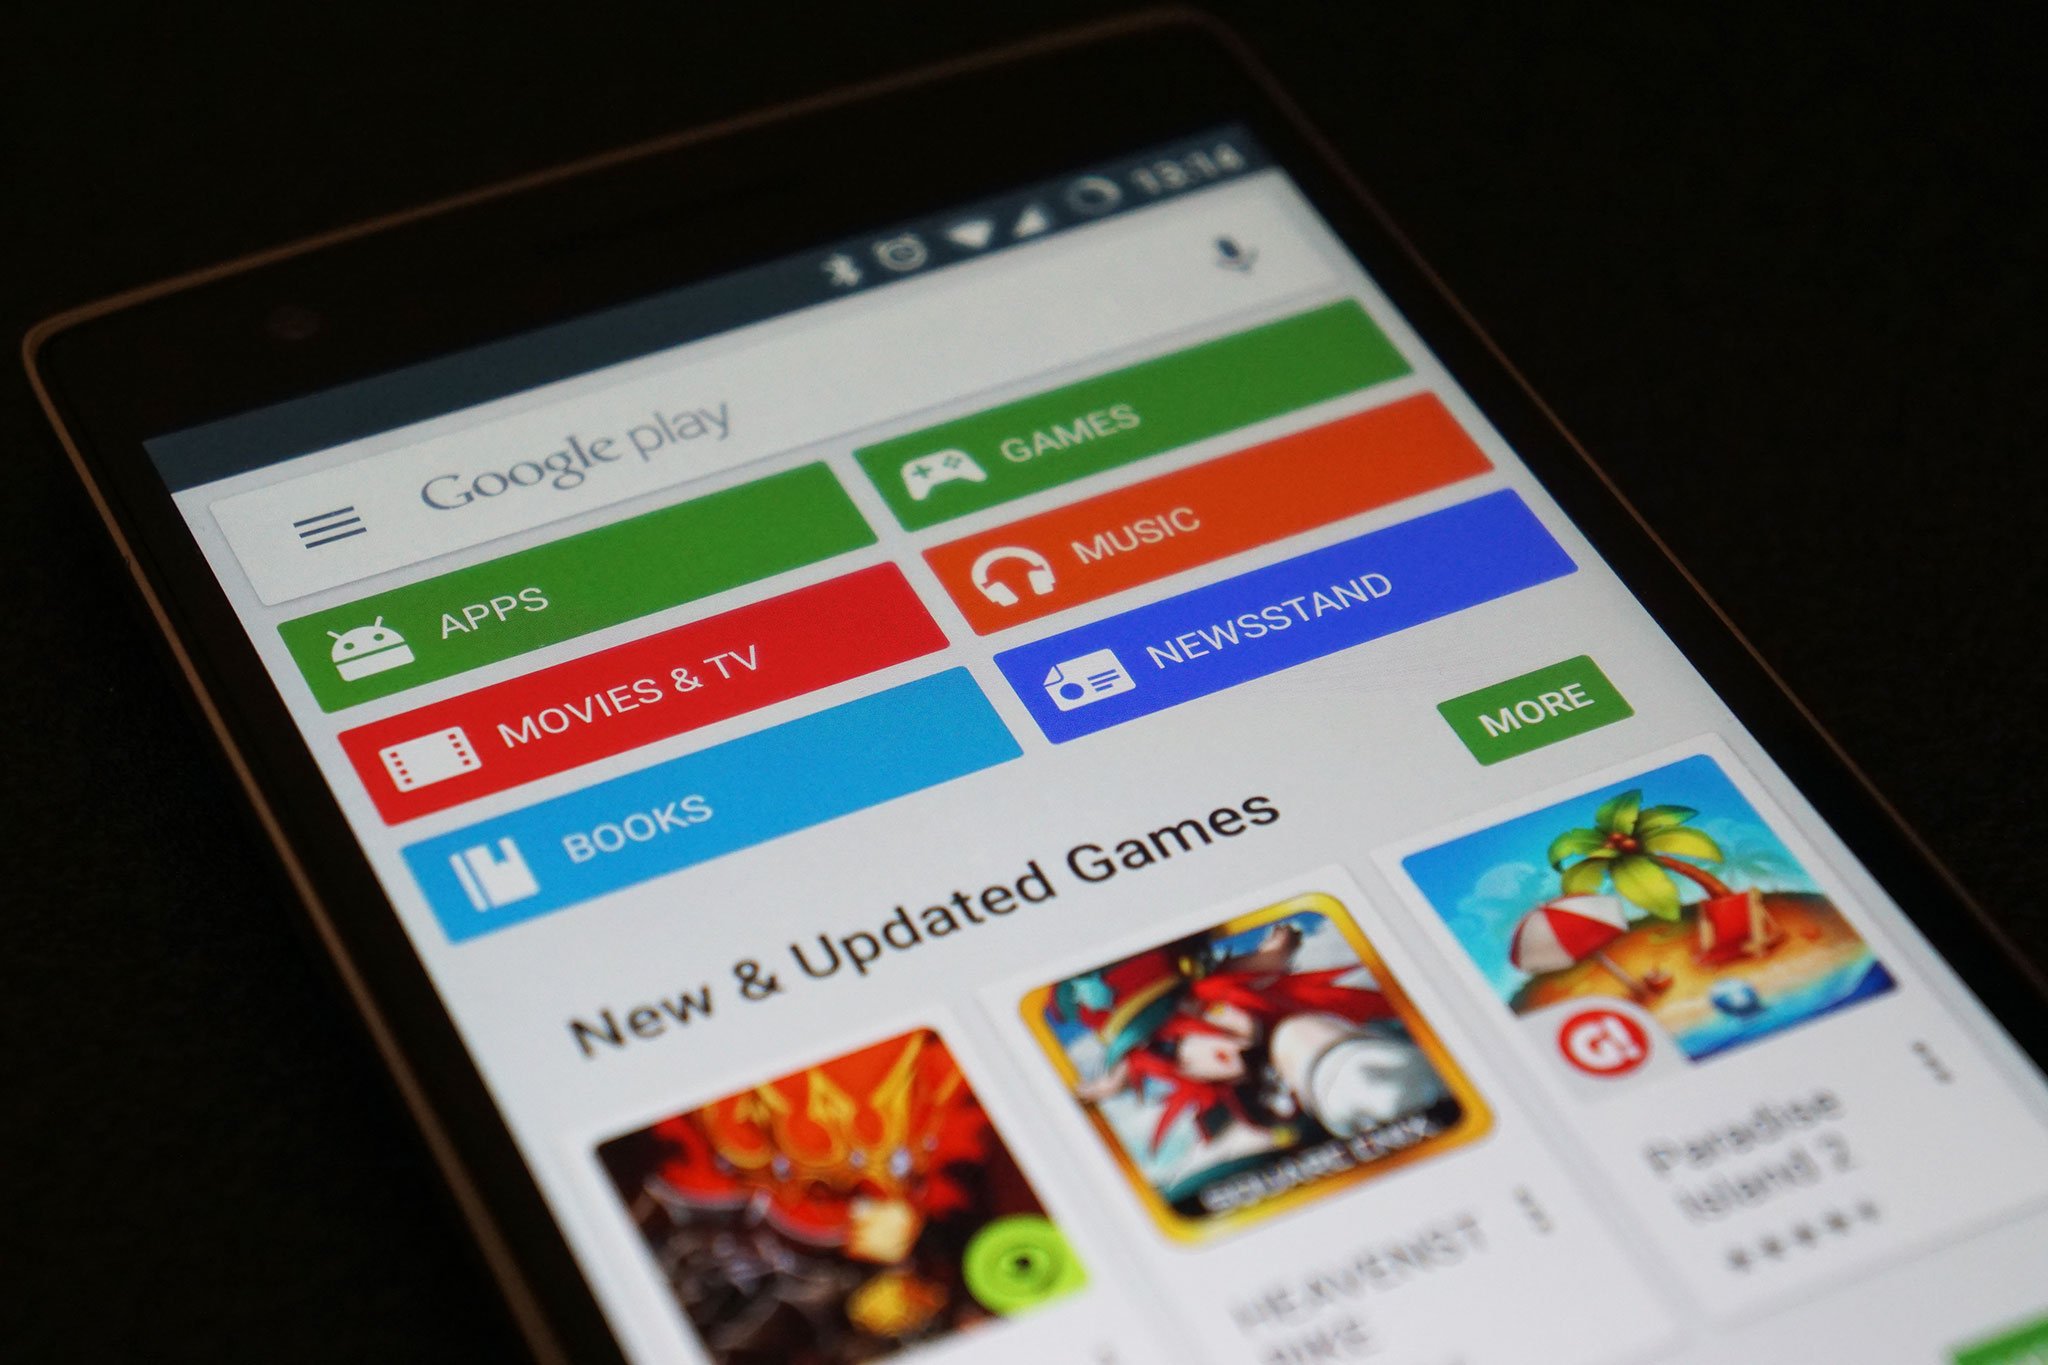 Developers in Azerbaijan, Iceland, Peru, and Yemen can now register to sell paid apps on Google play